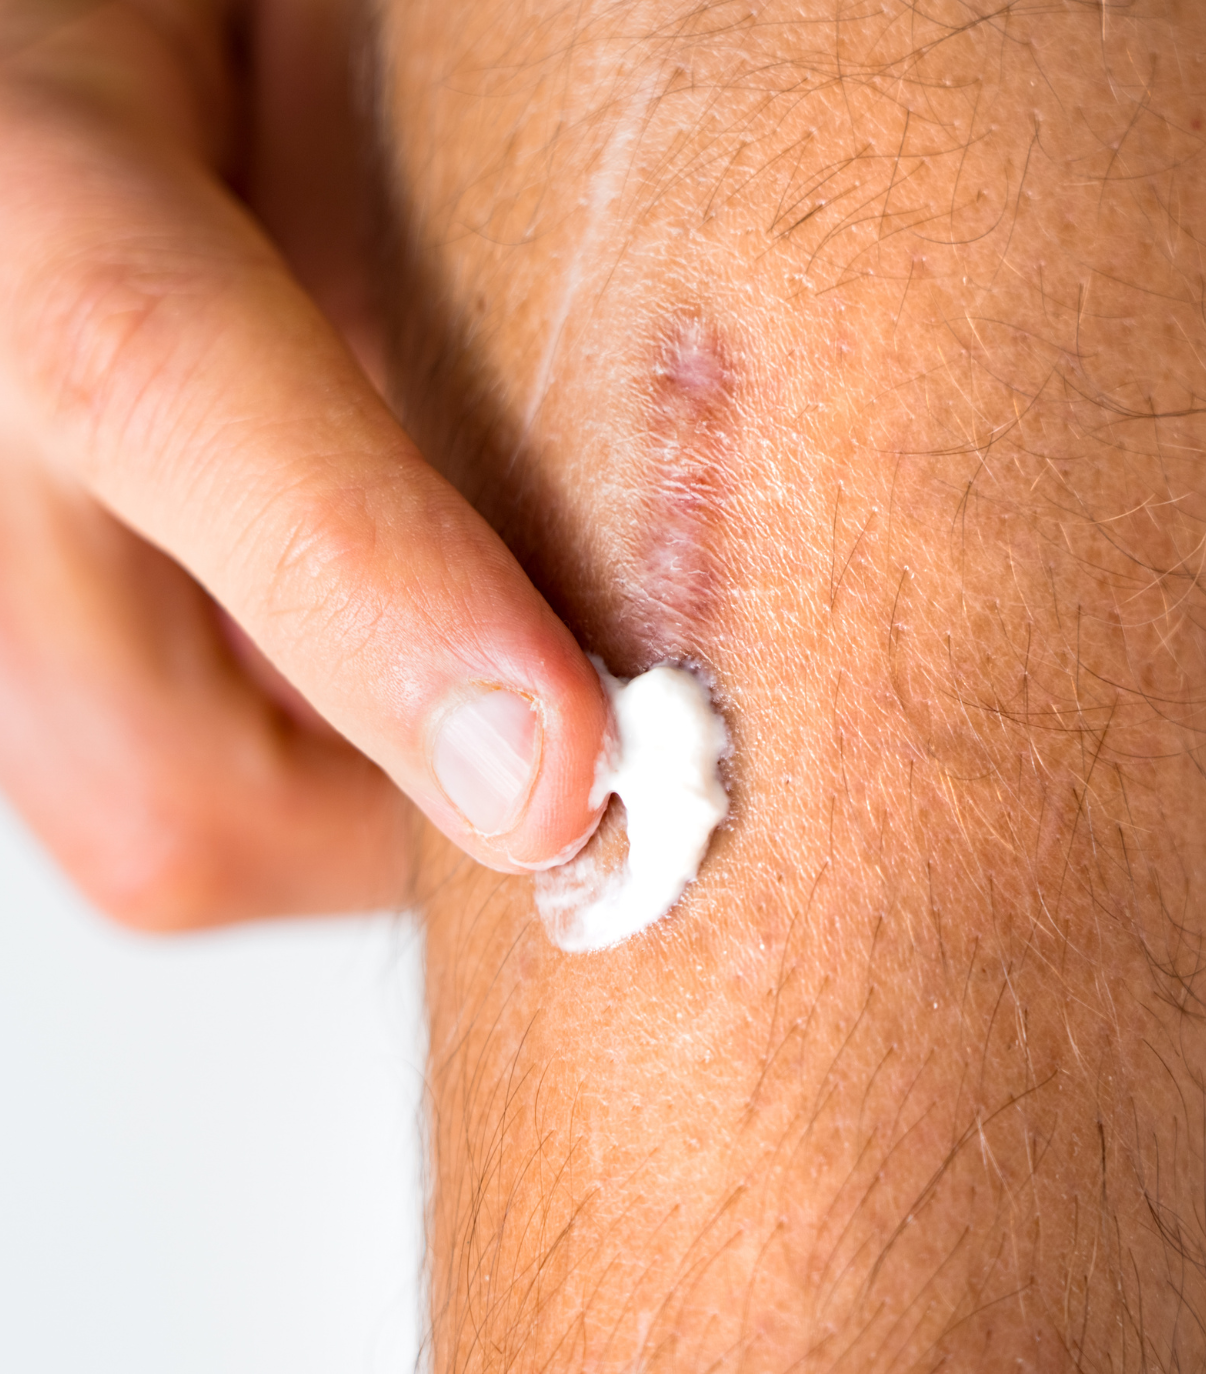 Scar Care After Stitches: Tips for Optimal Healing – Motivo Scar Care